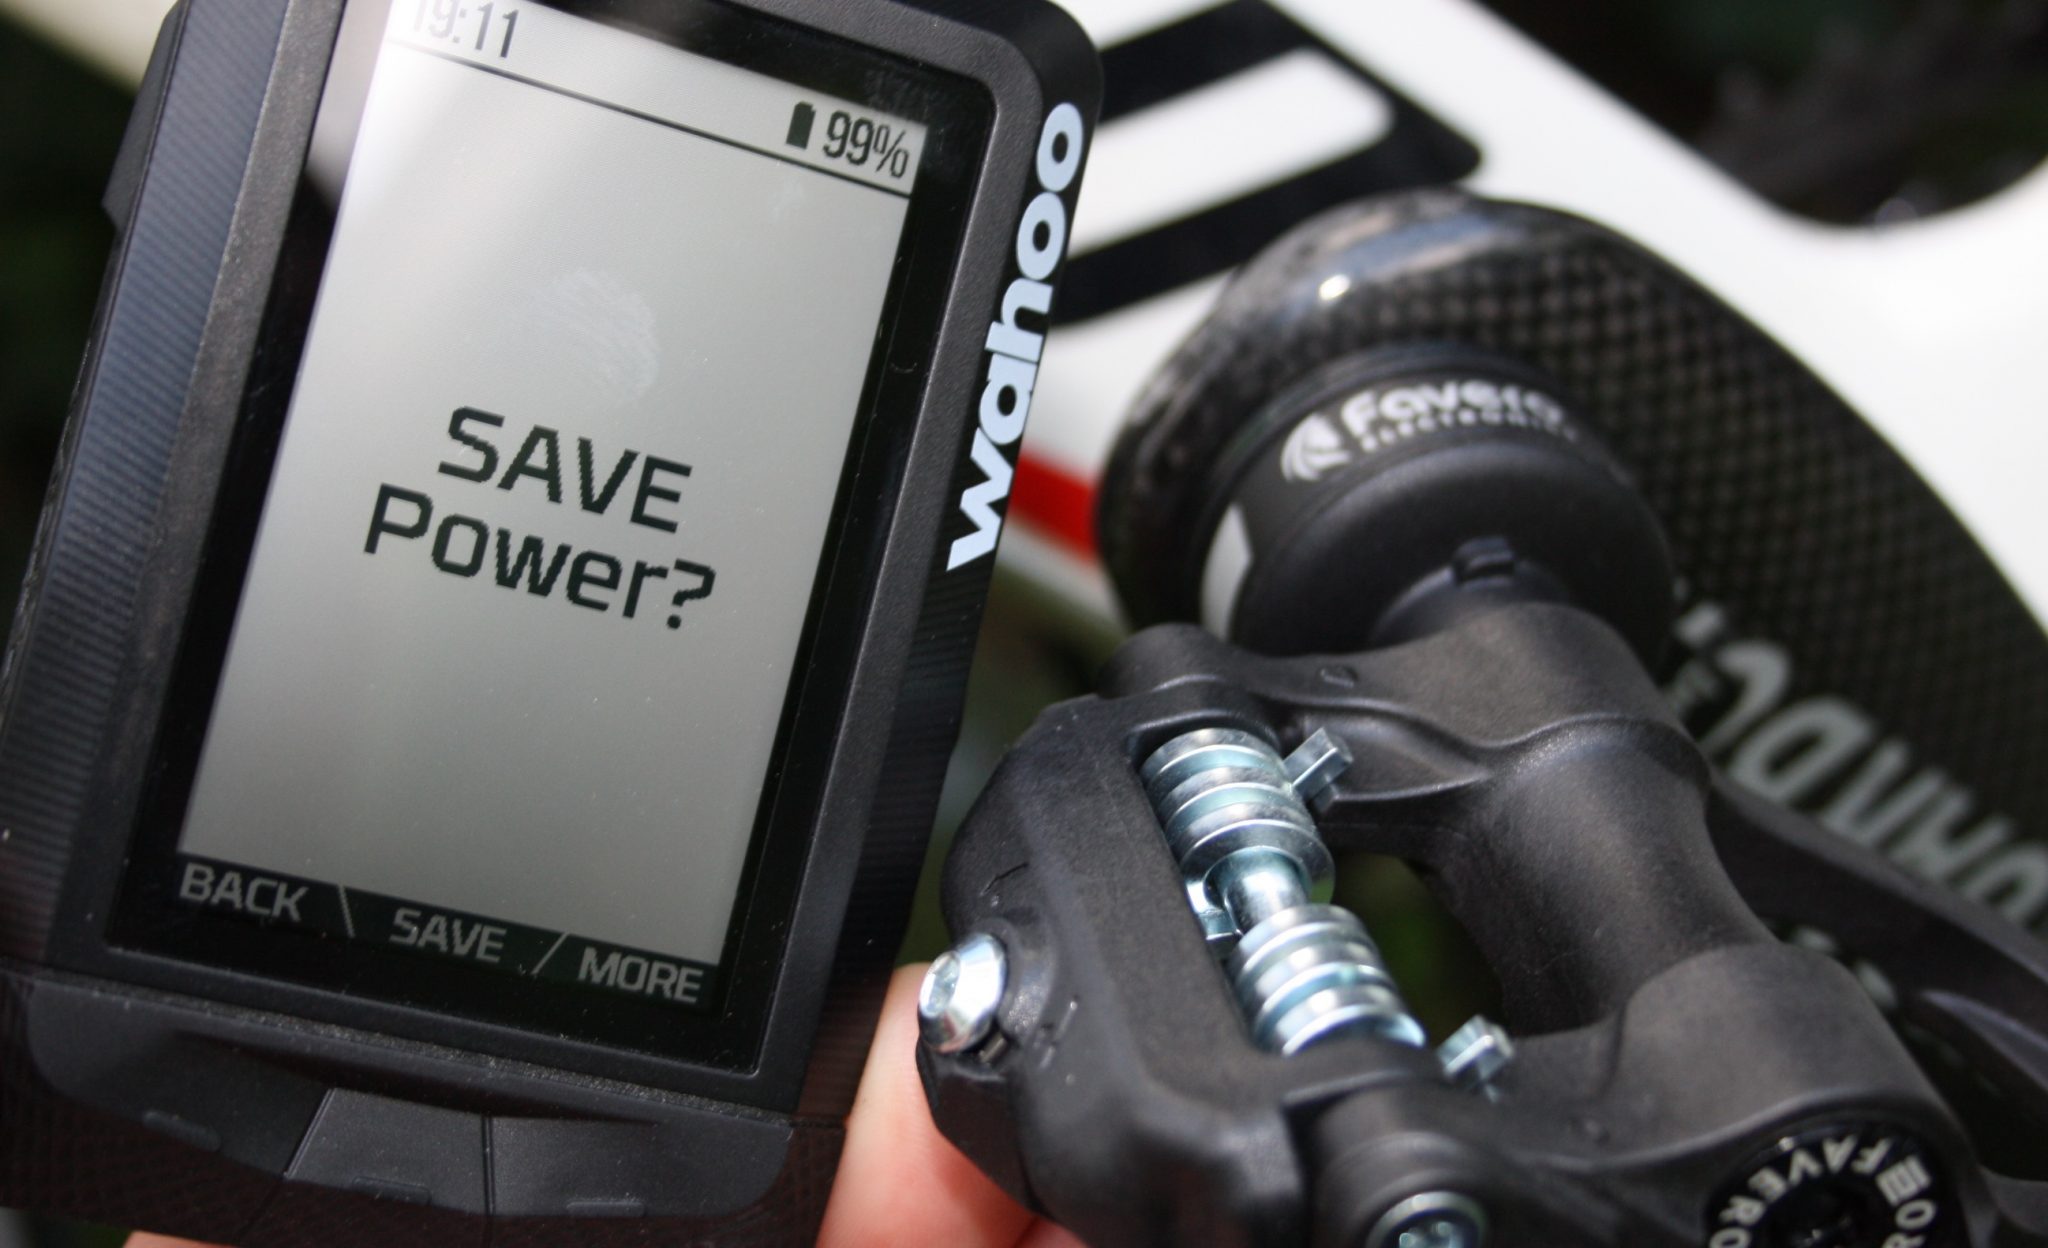 Review Favero Assioma Duo Uno Power Meter Pedal WAHOO ELEMNT